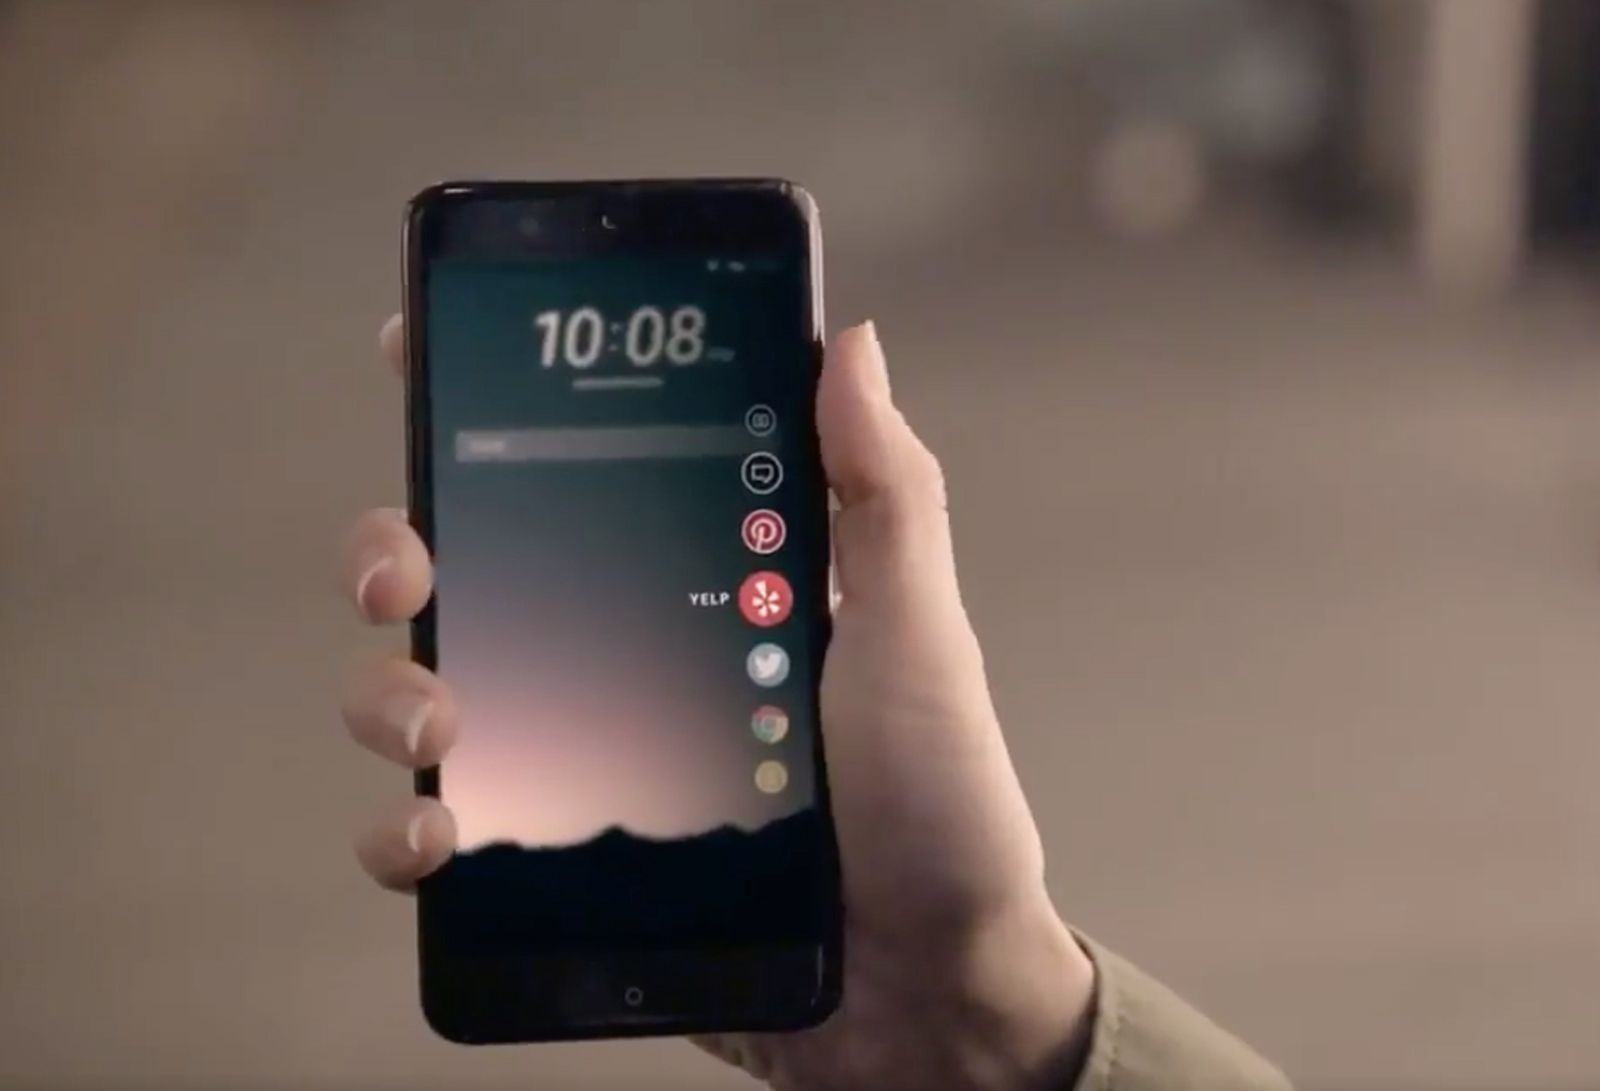 htc ocean s touch ui gets another video leak this time looking more official image 1